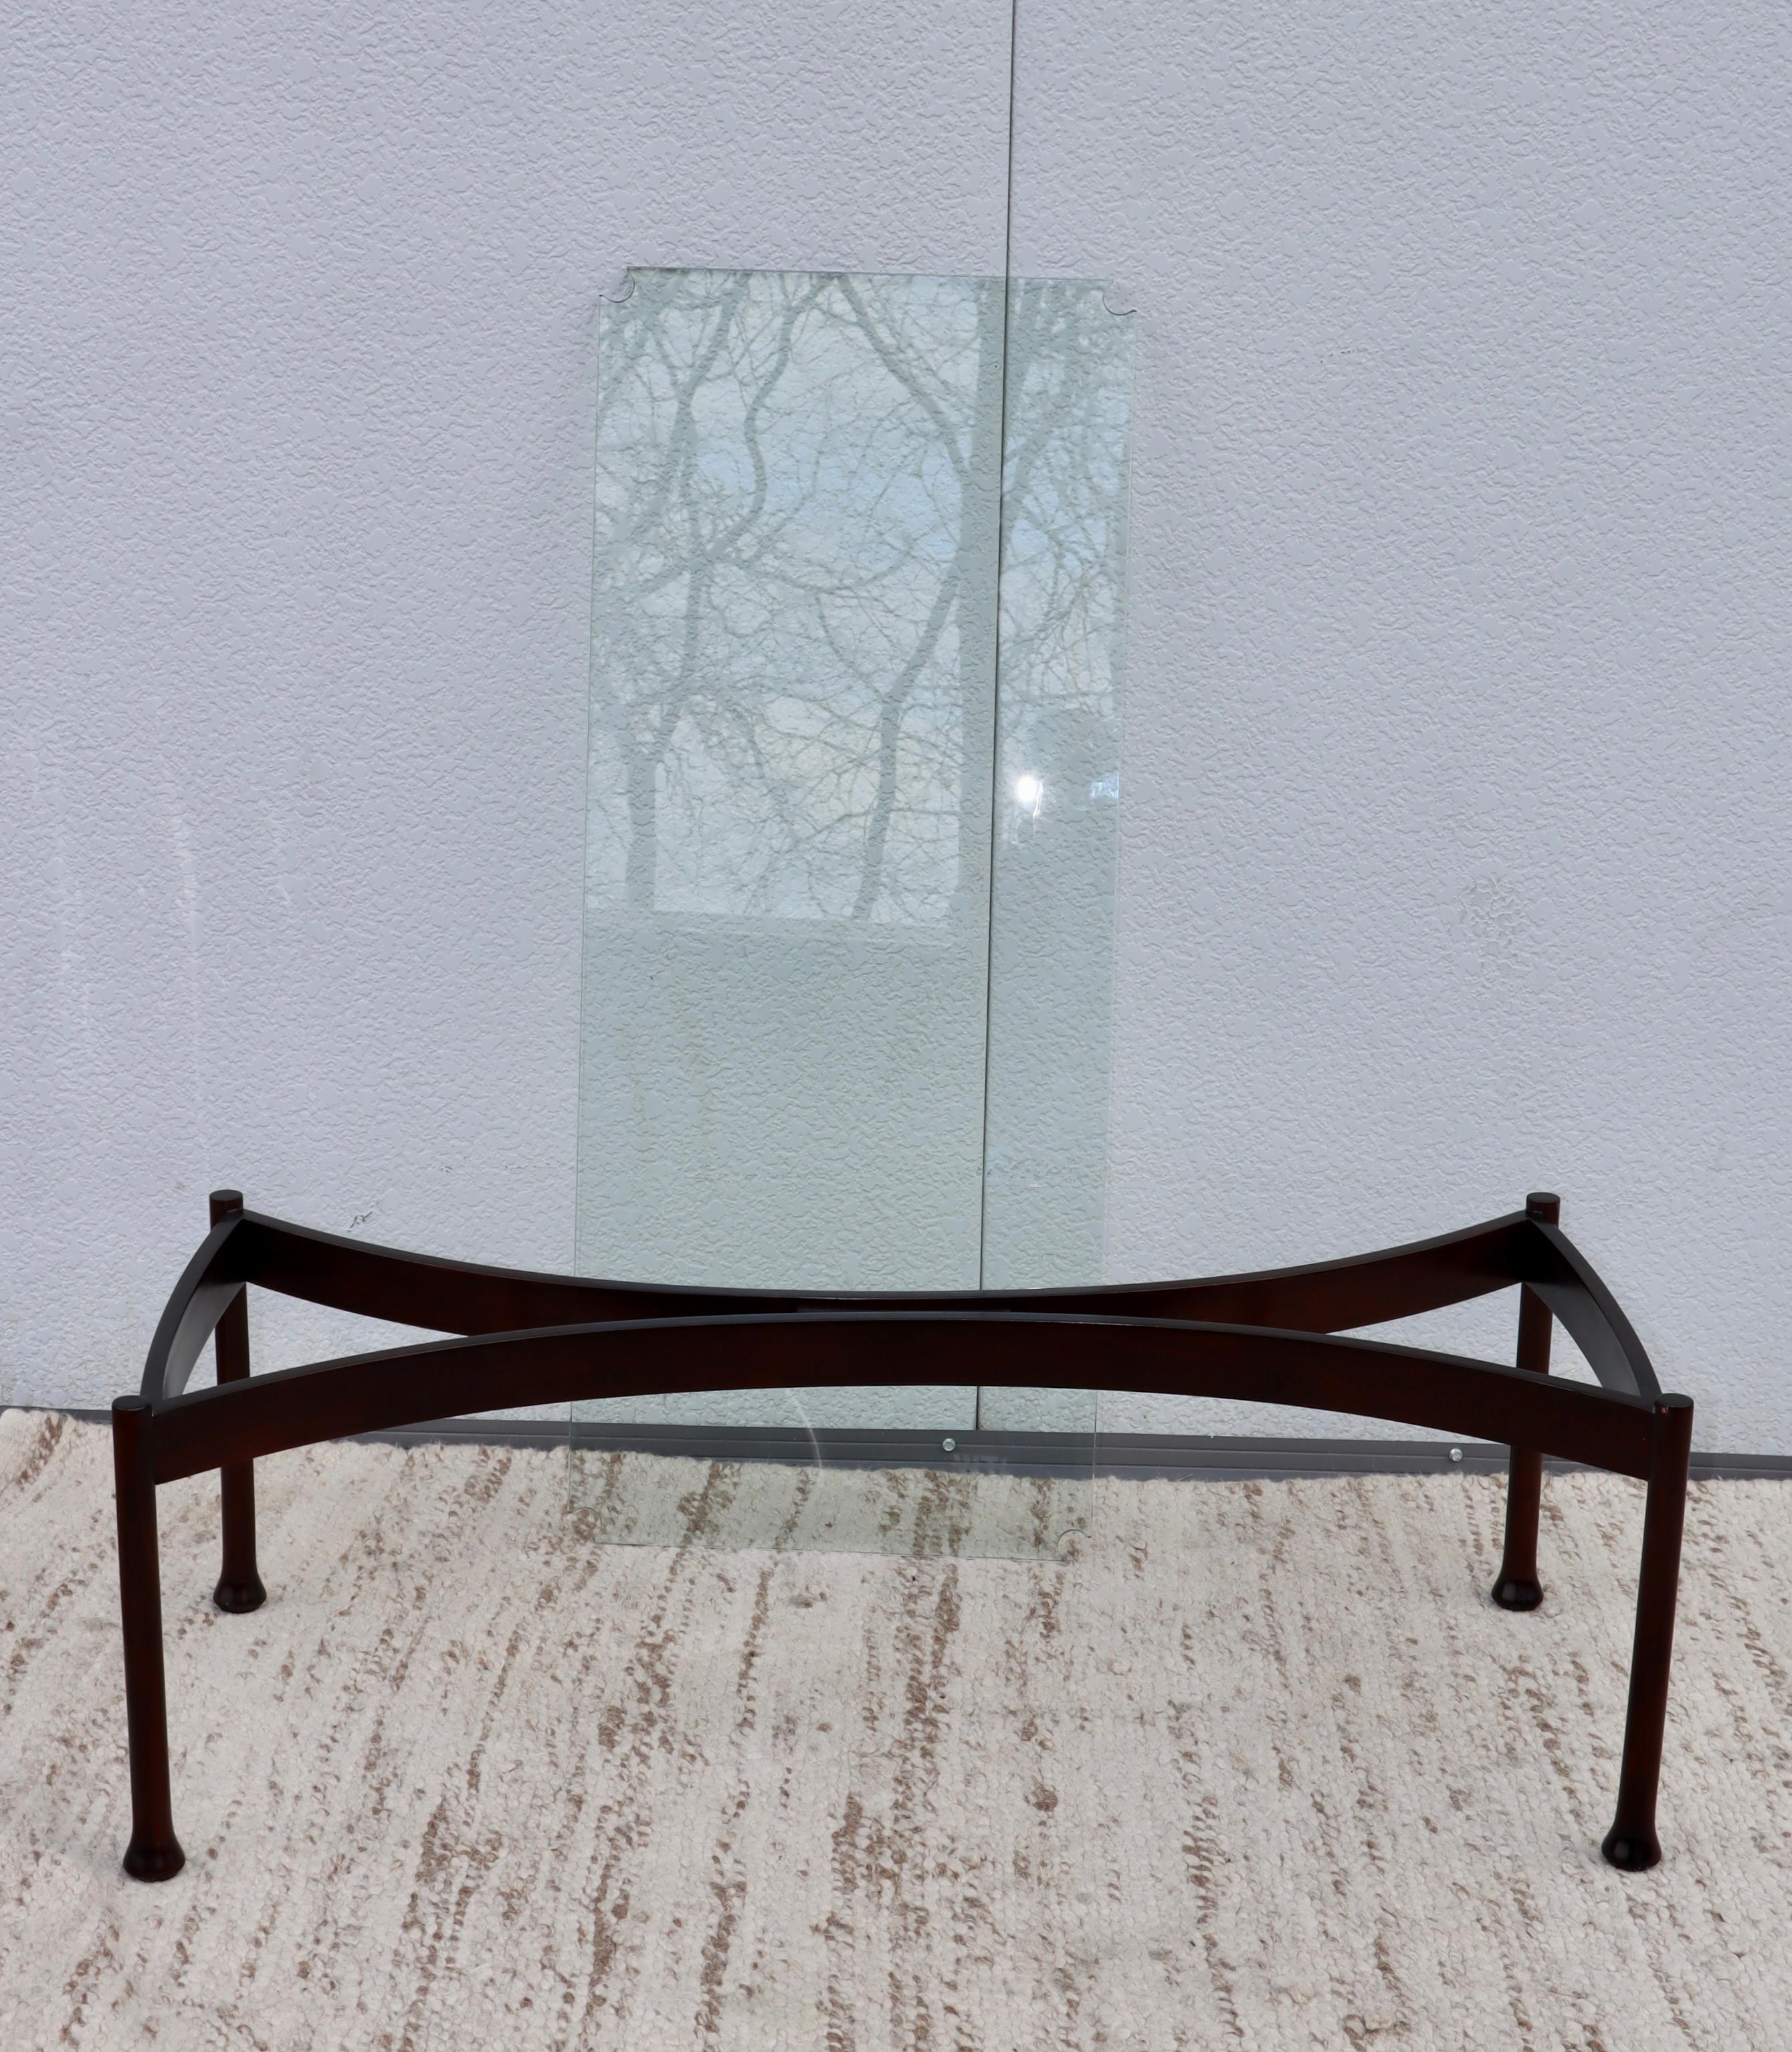 1960s Mid-Century Modern Italian Coffee Table with Glass Top For Sale 8